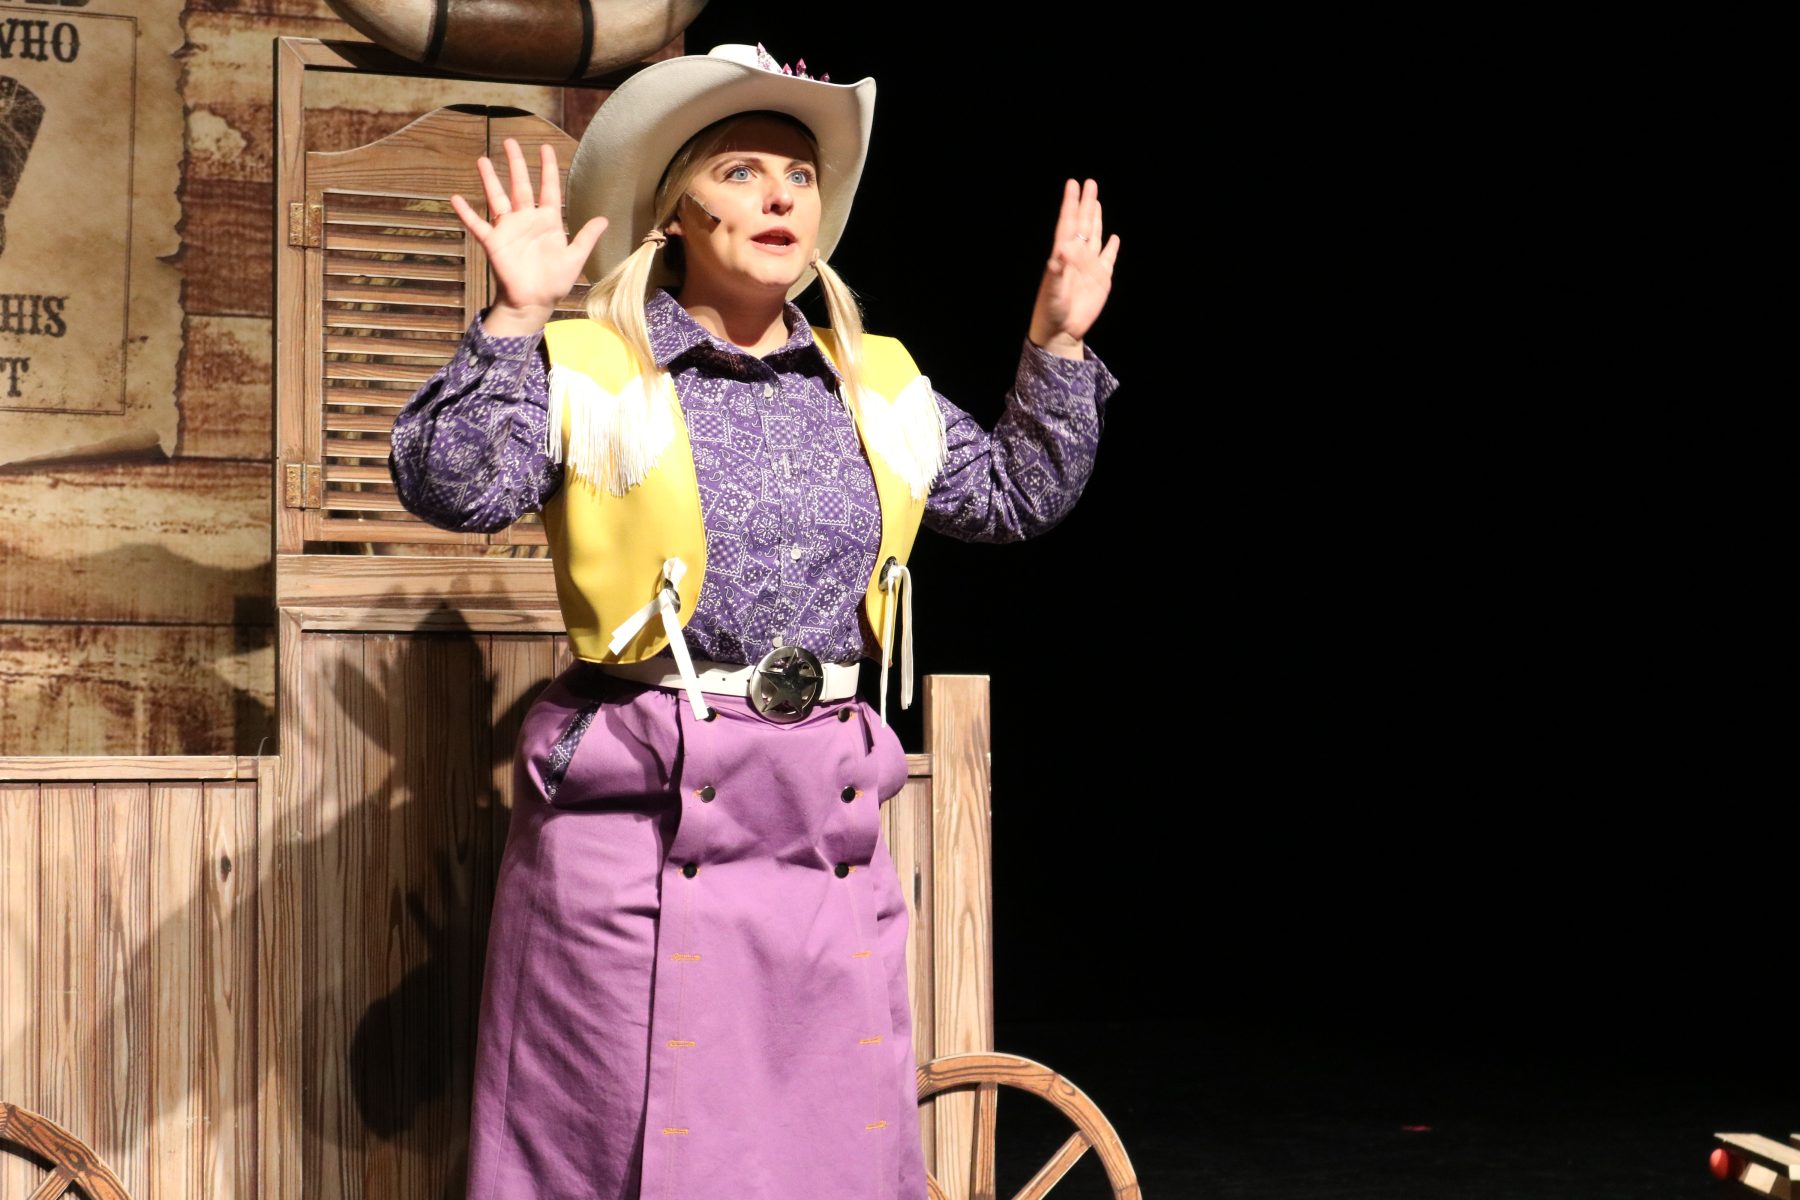 actor in purple shirt and skirt in cowboy hat